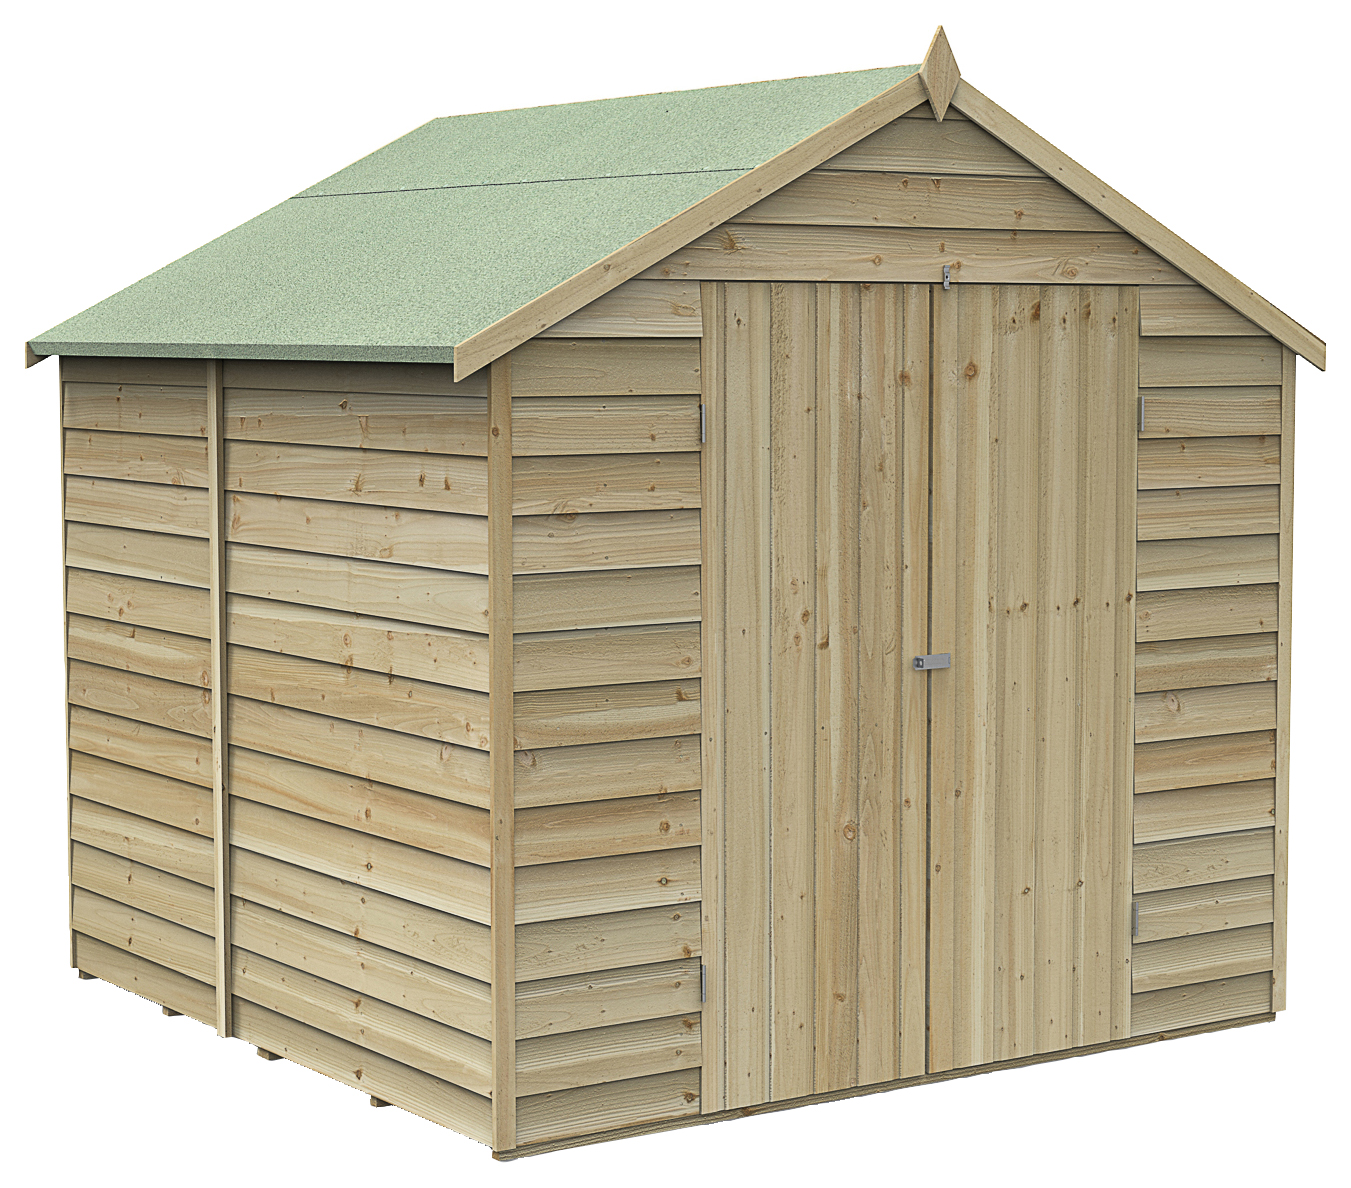 Forest Garden 7 x 7ft 4Life Apex Overlap Pressure Treated Double Door Windowless Shed with Base